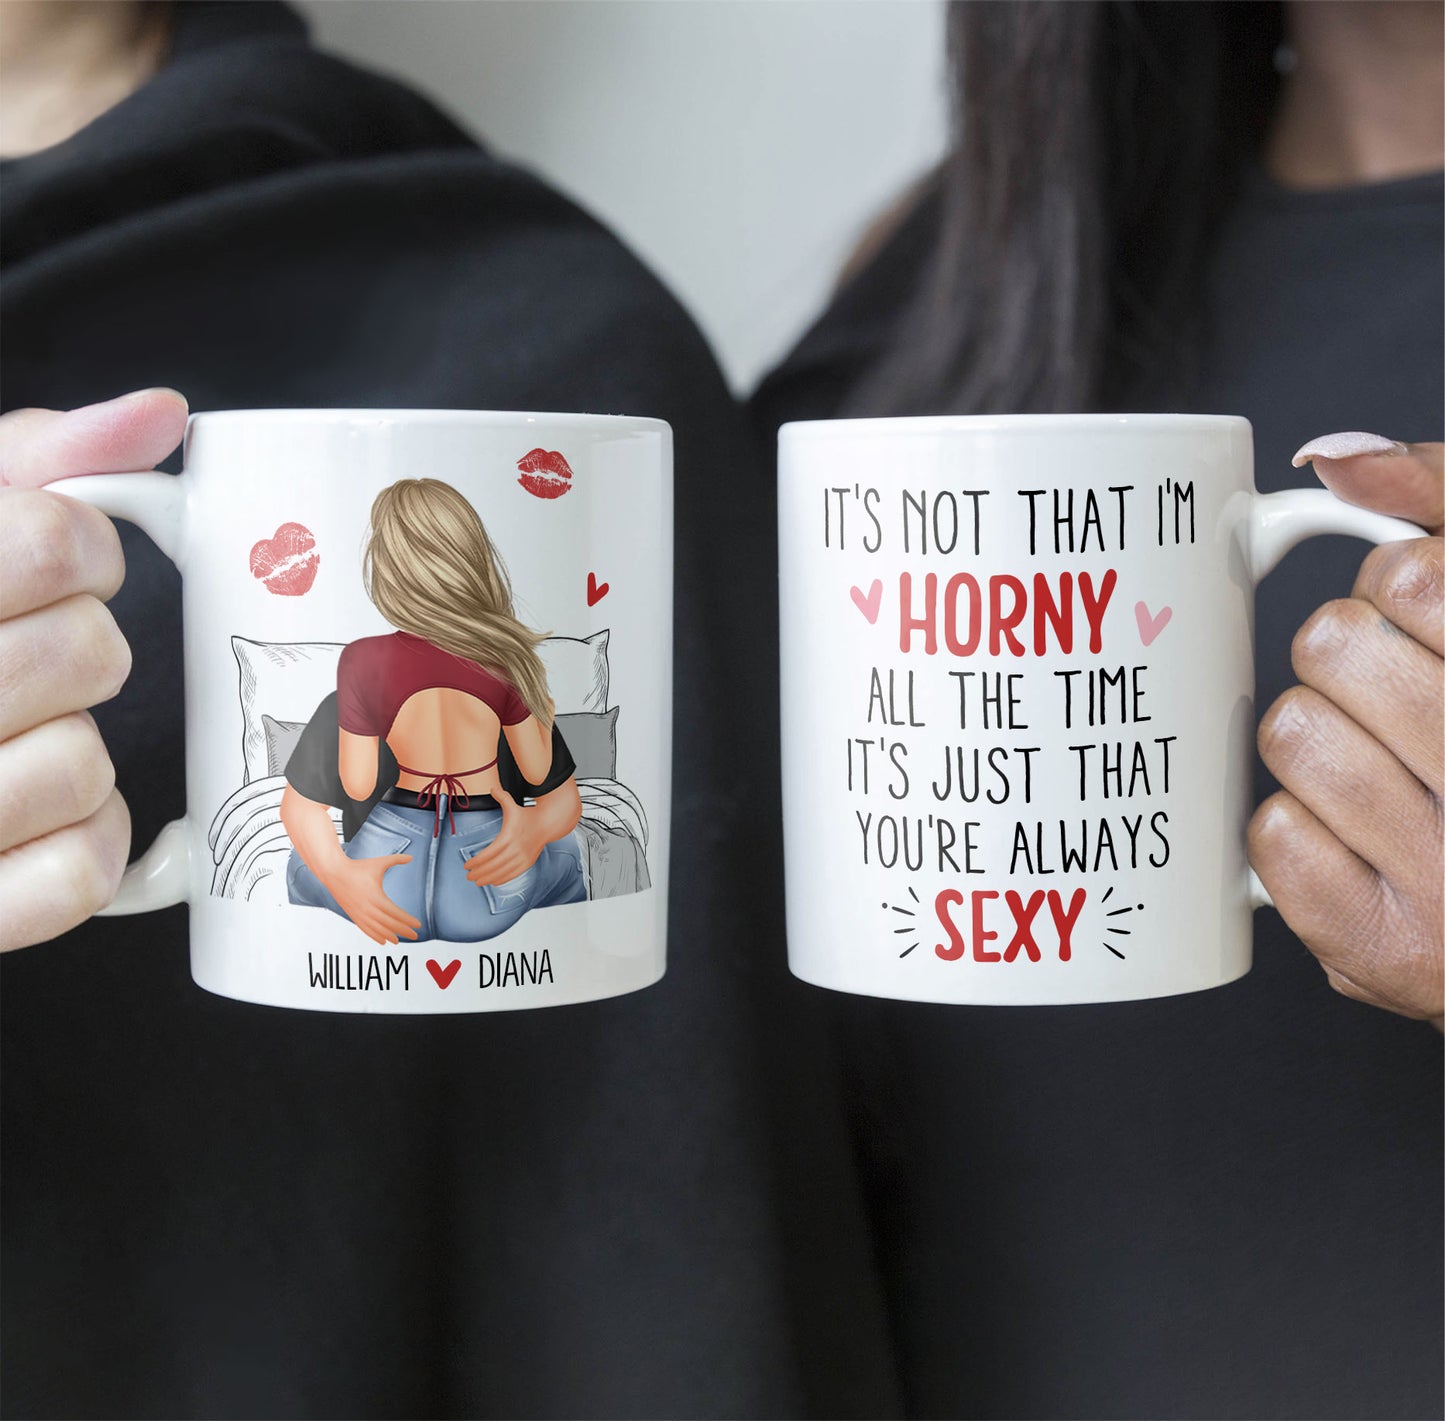 It's Not That I'm Horny All The Time - Personalized Mug - Anniversary Gifts For Her, Wife, Girlfriend